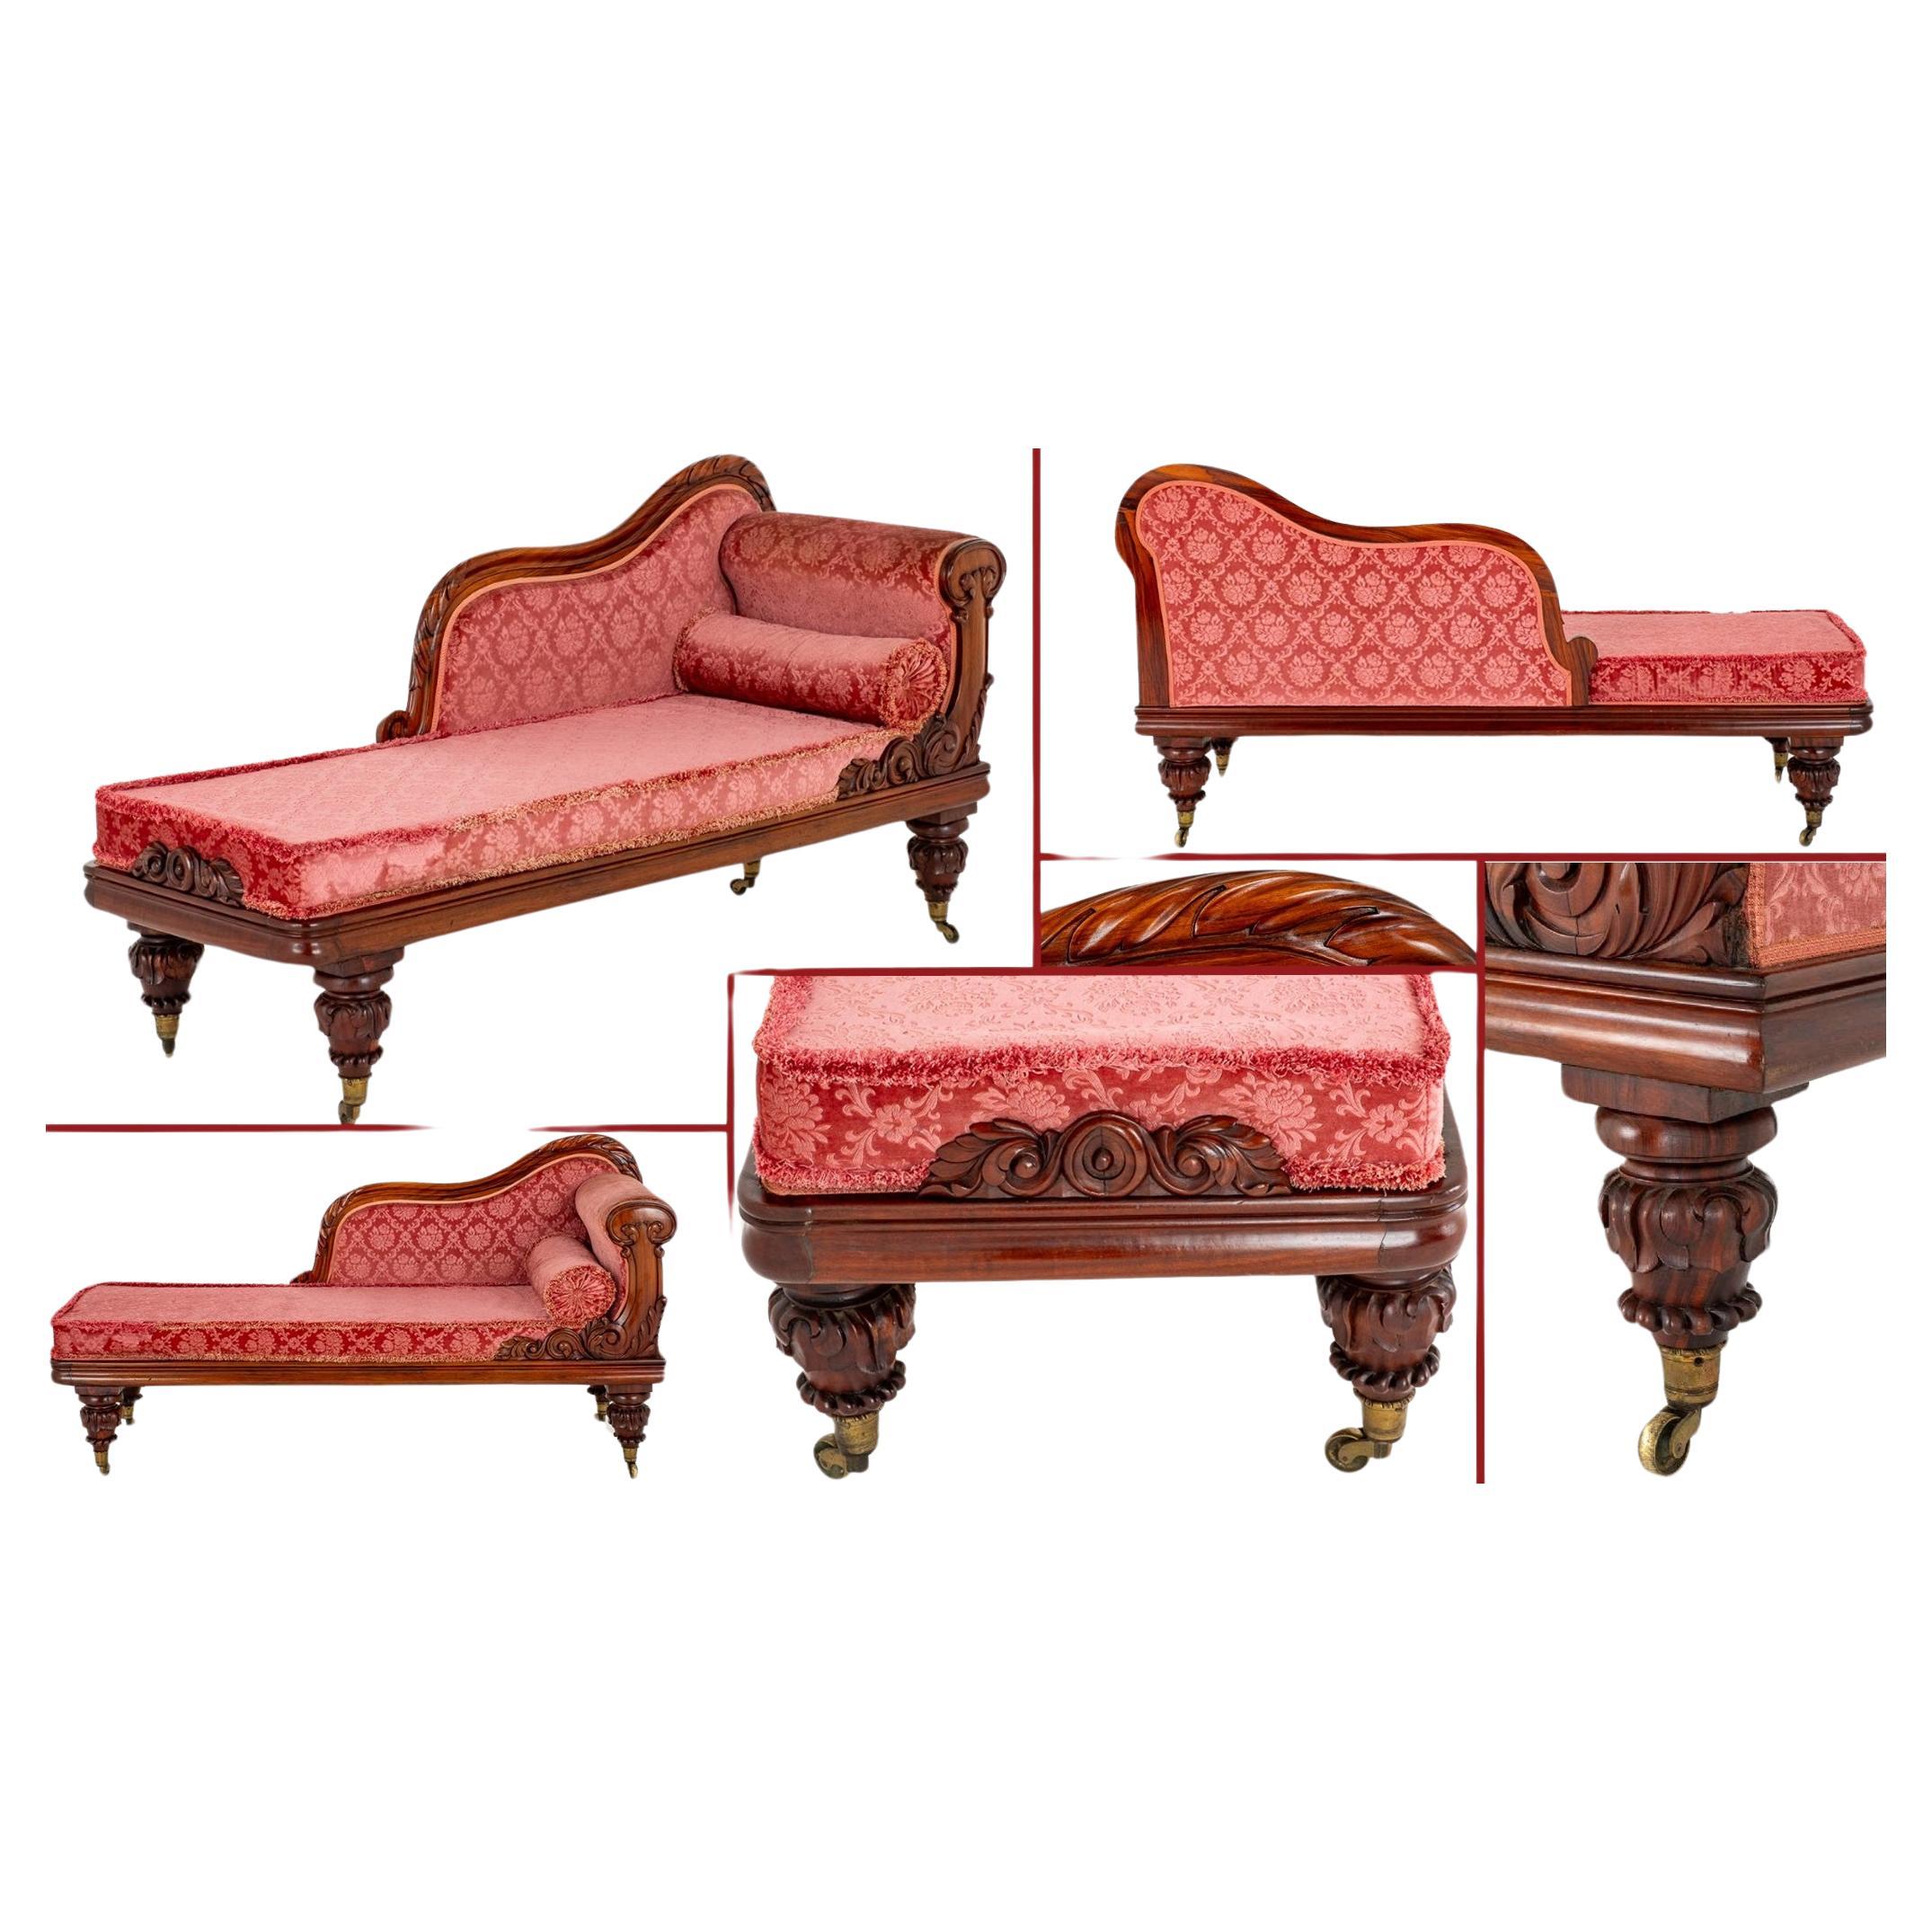 Period William IV Chaise Longue Chair Day Bed For Sale